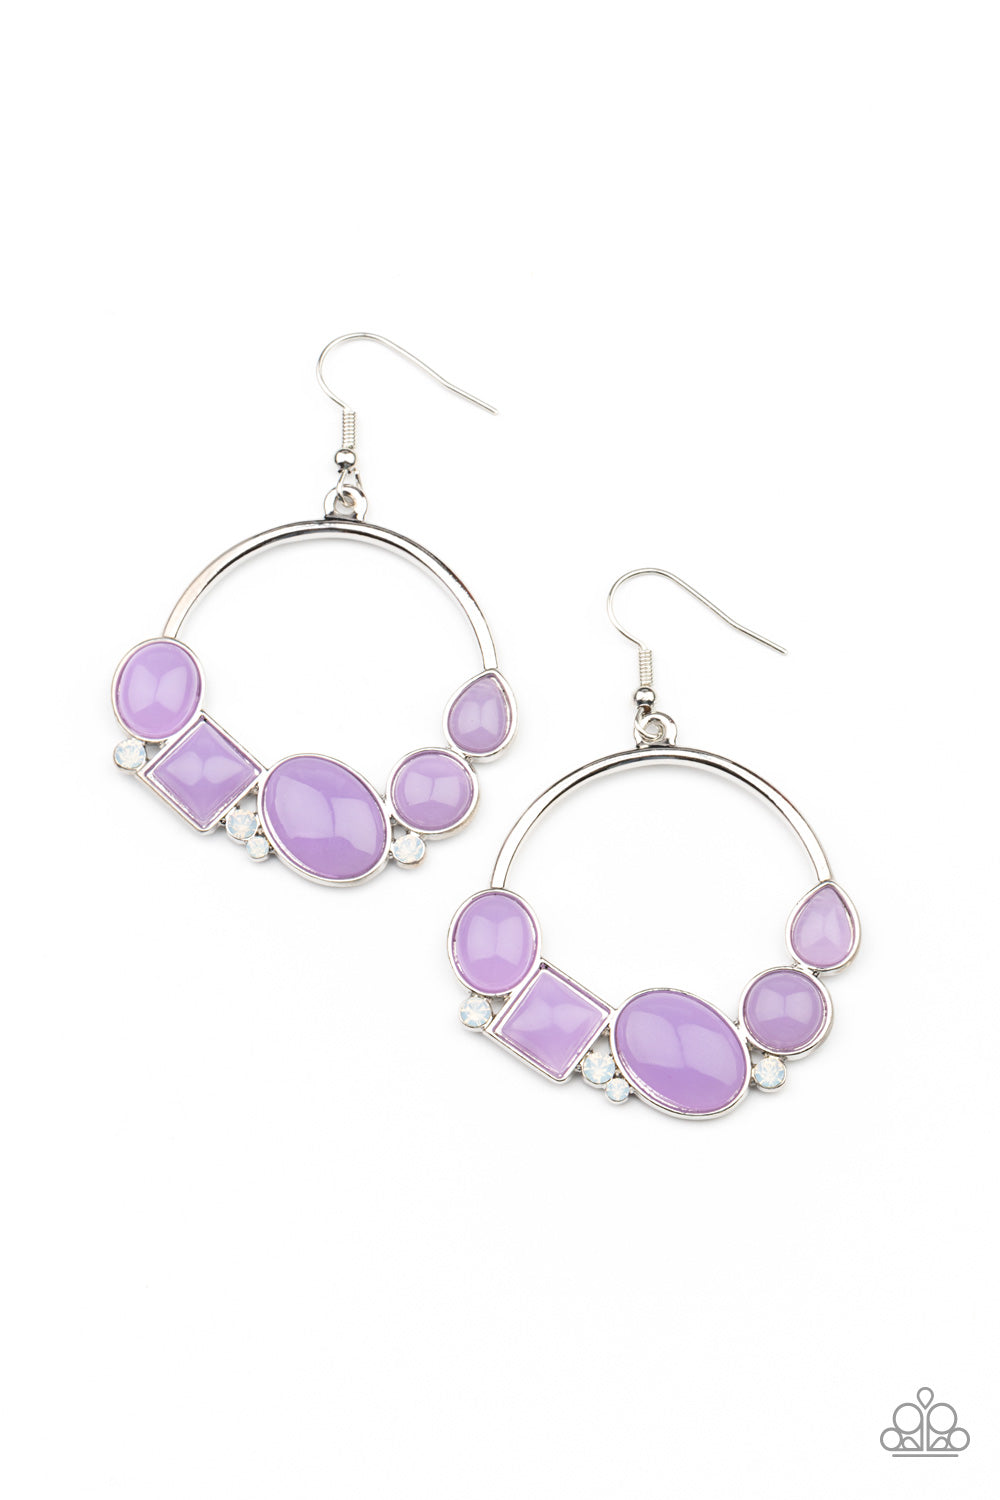 Beautifully Bubblicious Purple Earring - Paparazzi Accessories.  Dainty opalescent white rhinestones are sprinkled between dewy oval, square, and circular purple beads along the bottom of a silver hoop, creating a bubbly pop of color. Earring attaches to a standard fishhook fitting.  ﻿All Paparazzi Accessories are lead free and nickel free!  Sold as one pair of earrings.